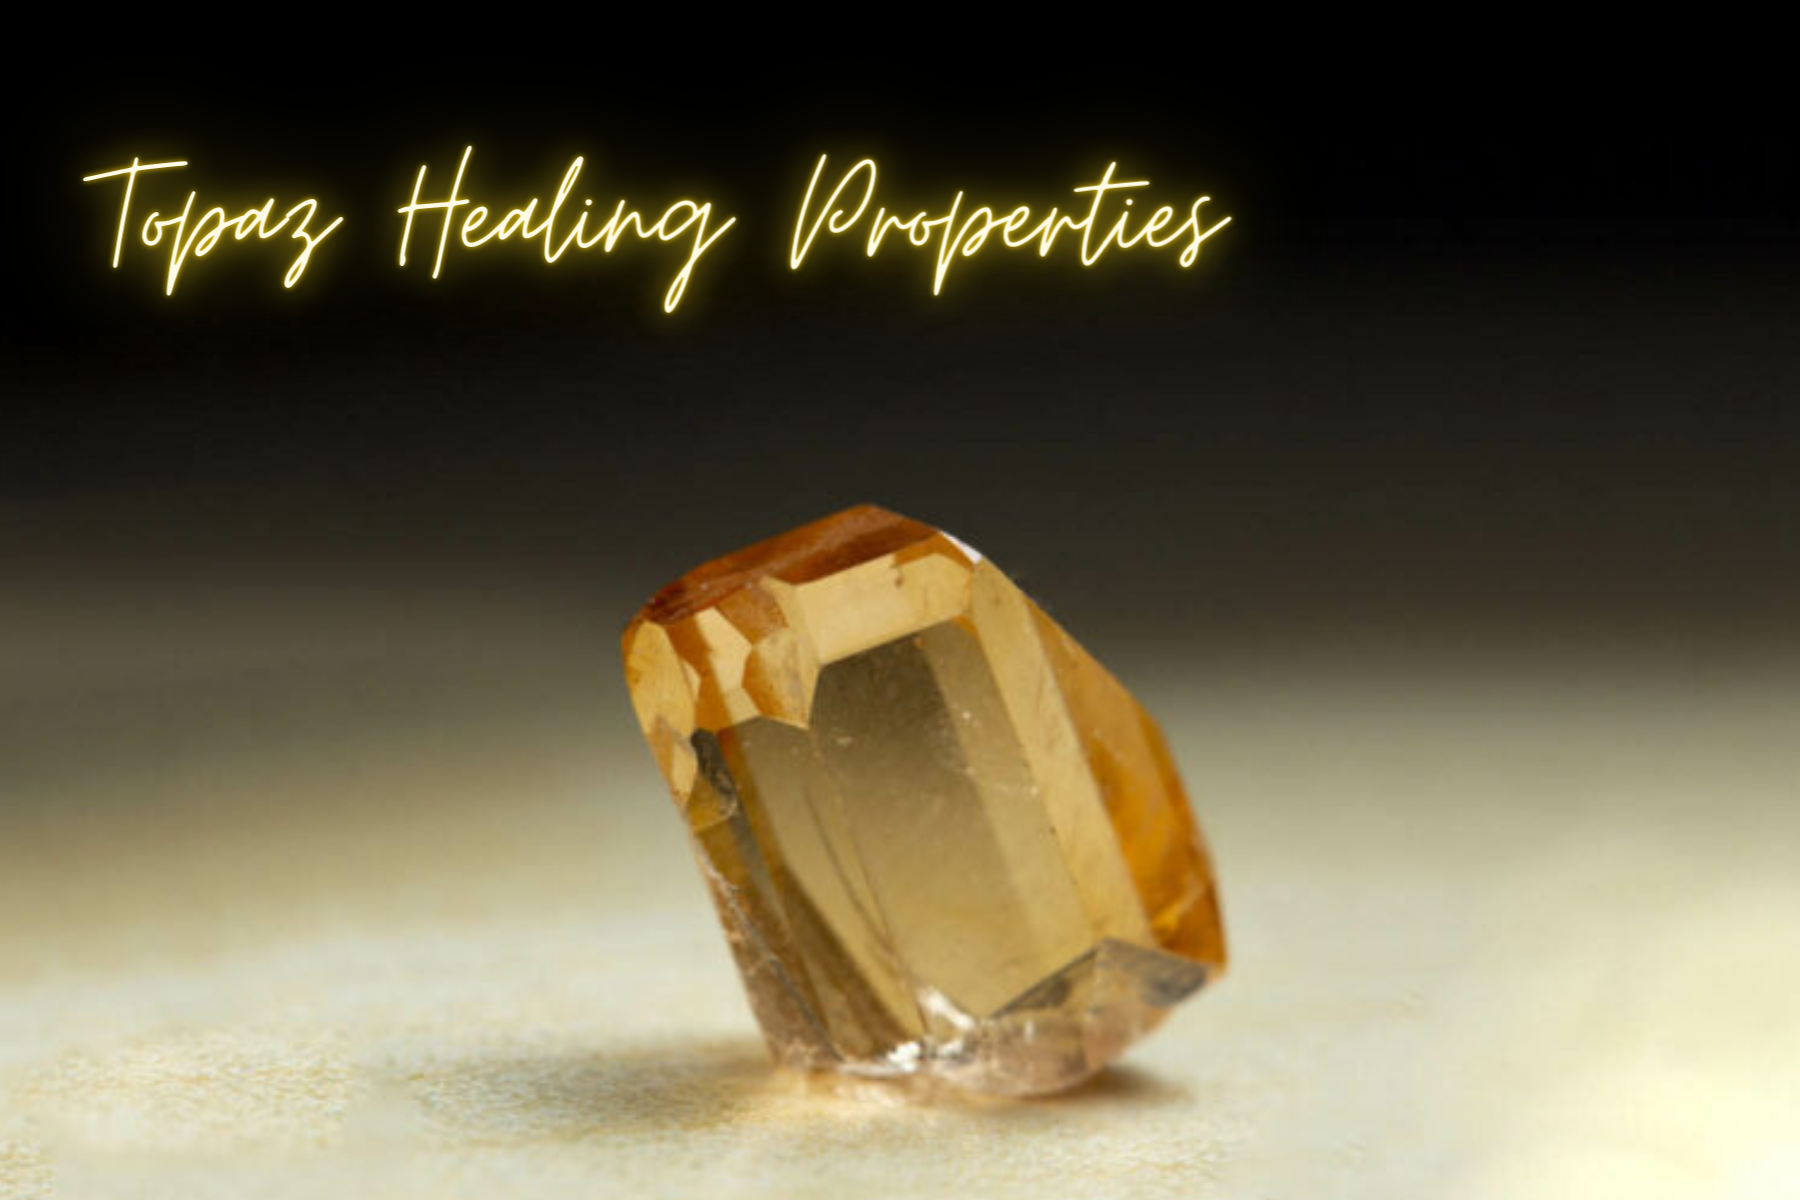 Topaz Healing Properties - Use Them To Improve Your Health